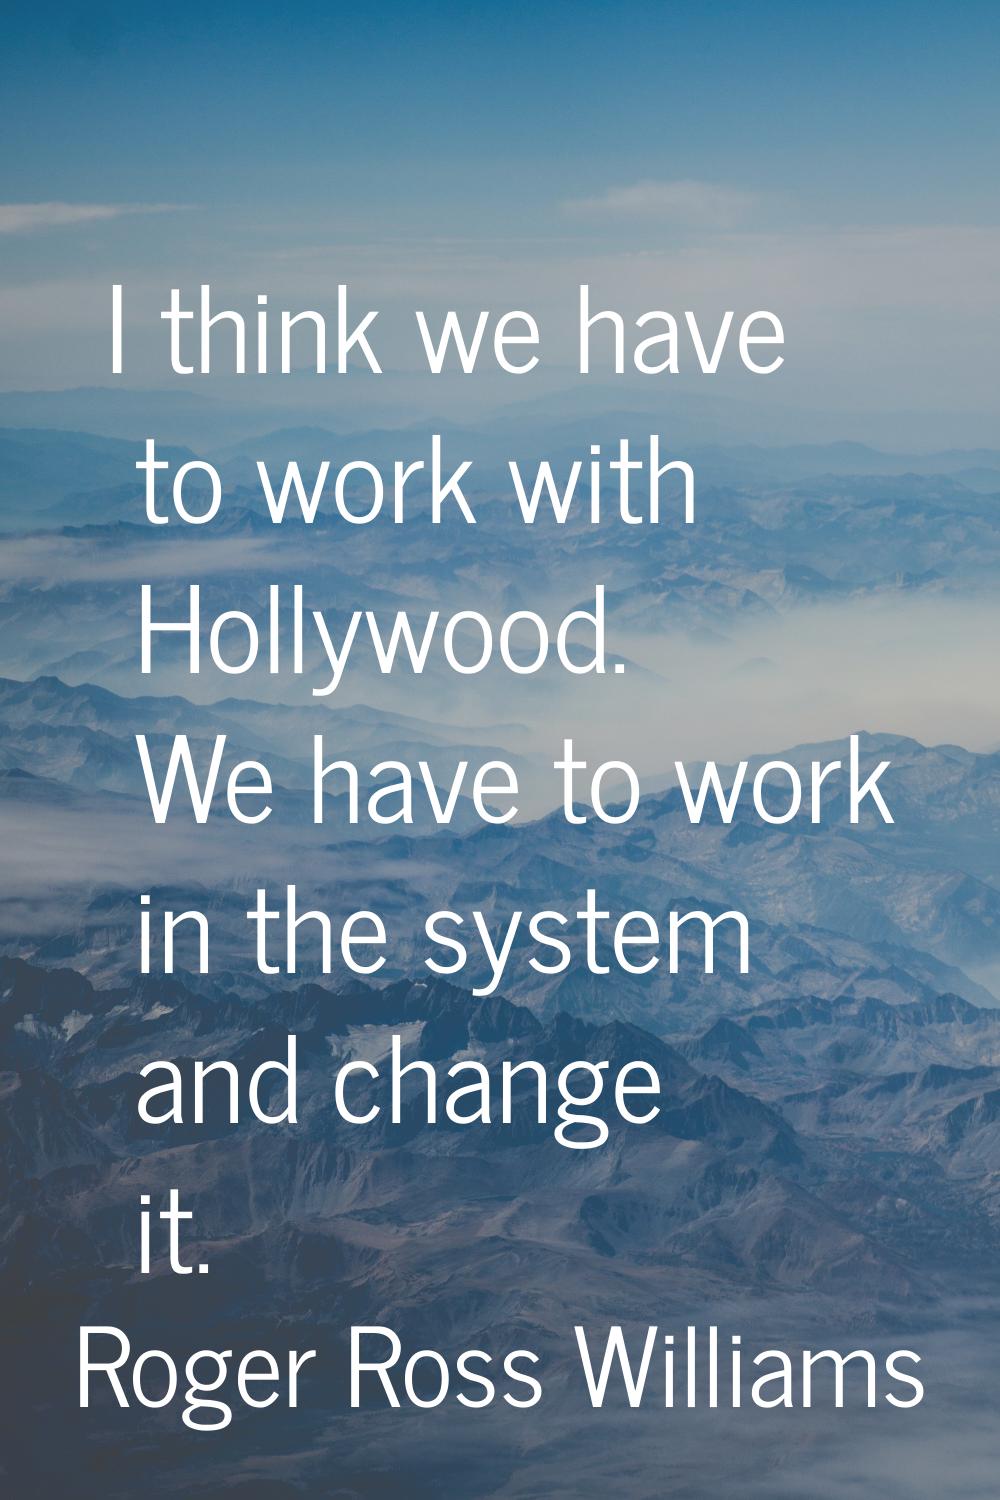 I think we have to work with Hollywood. We have to work in the system and change it.